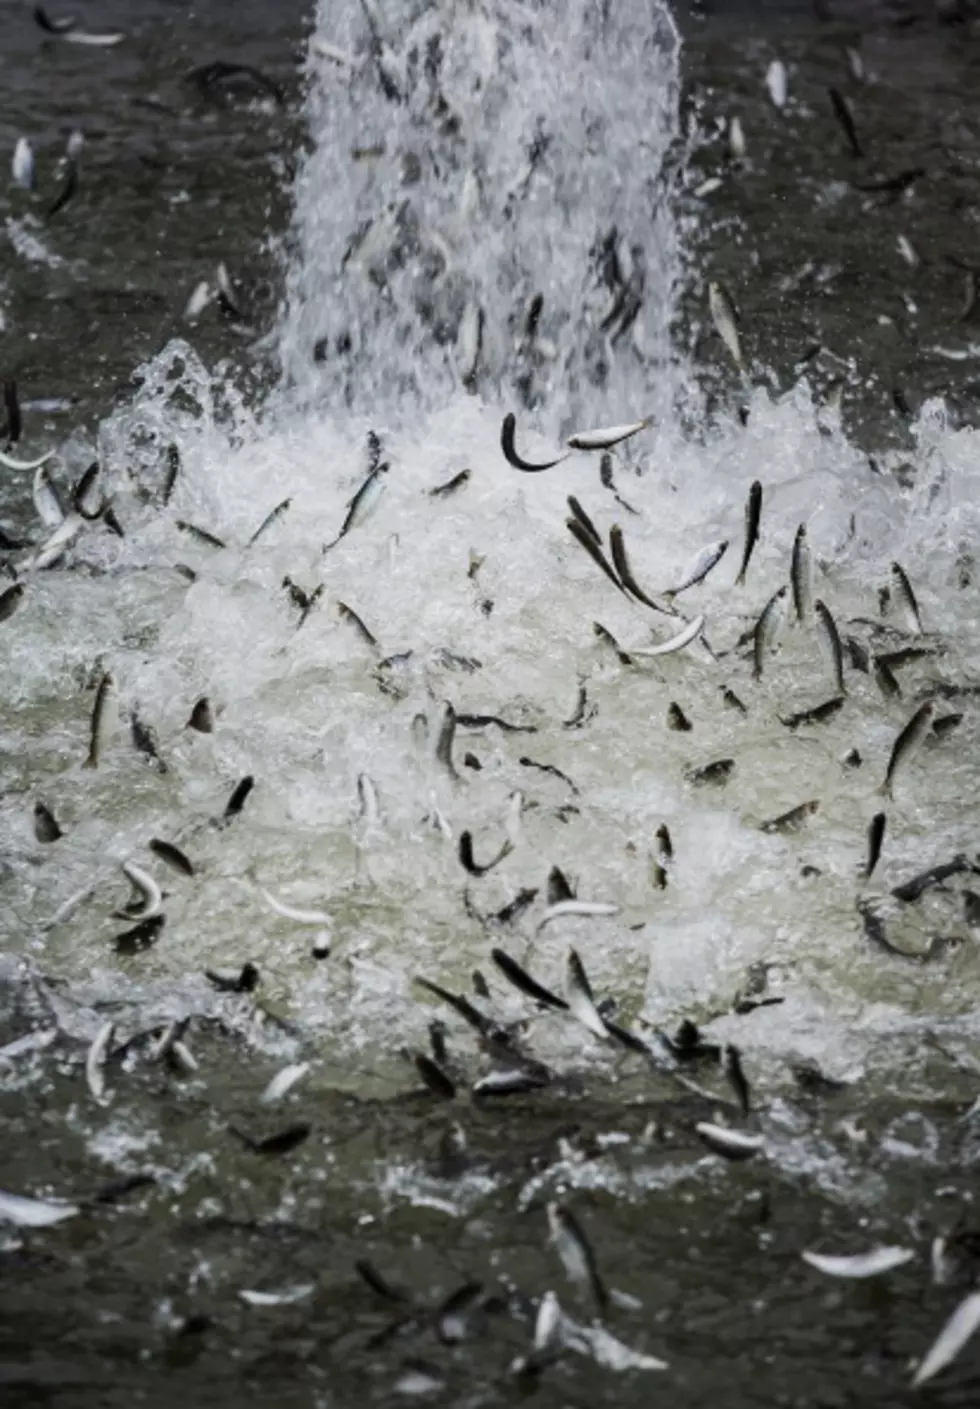 More Chinook Salmon Released Into Boise River Tomorrow